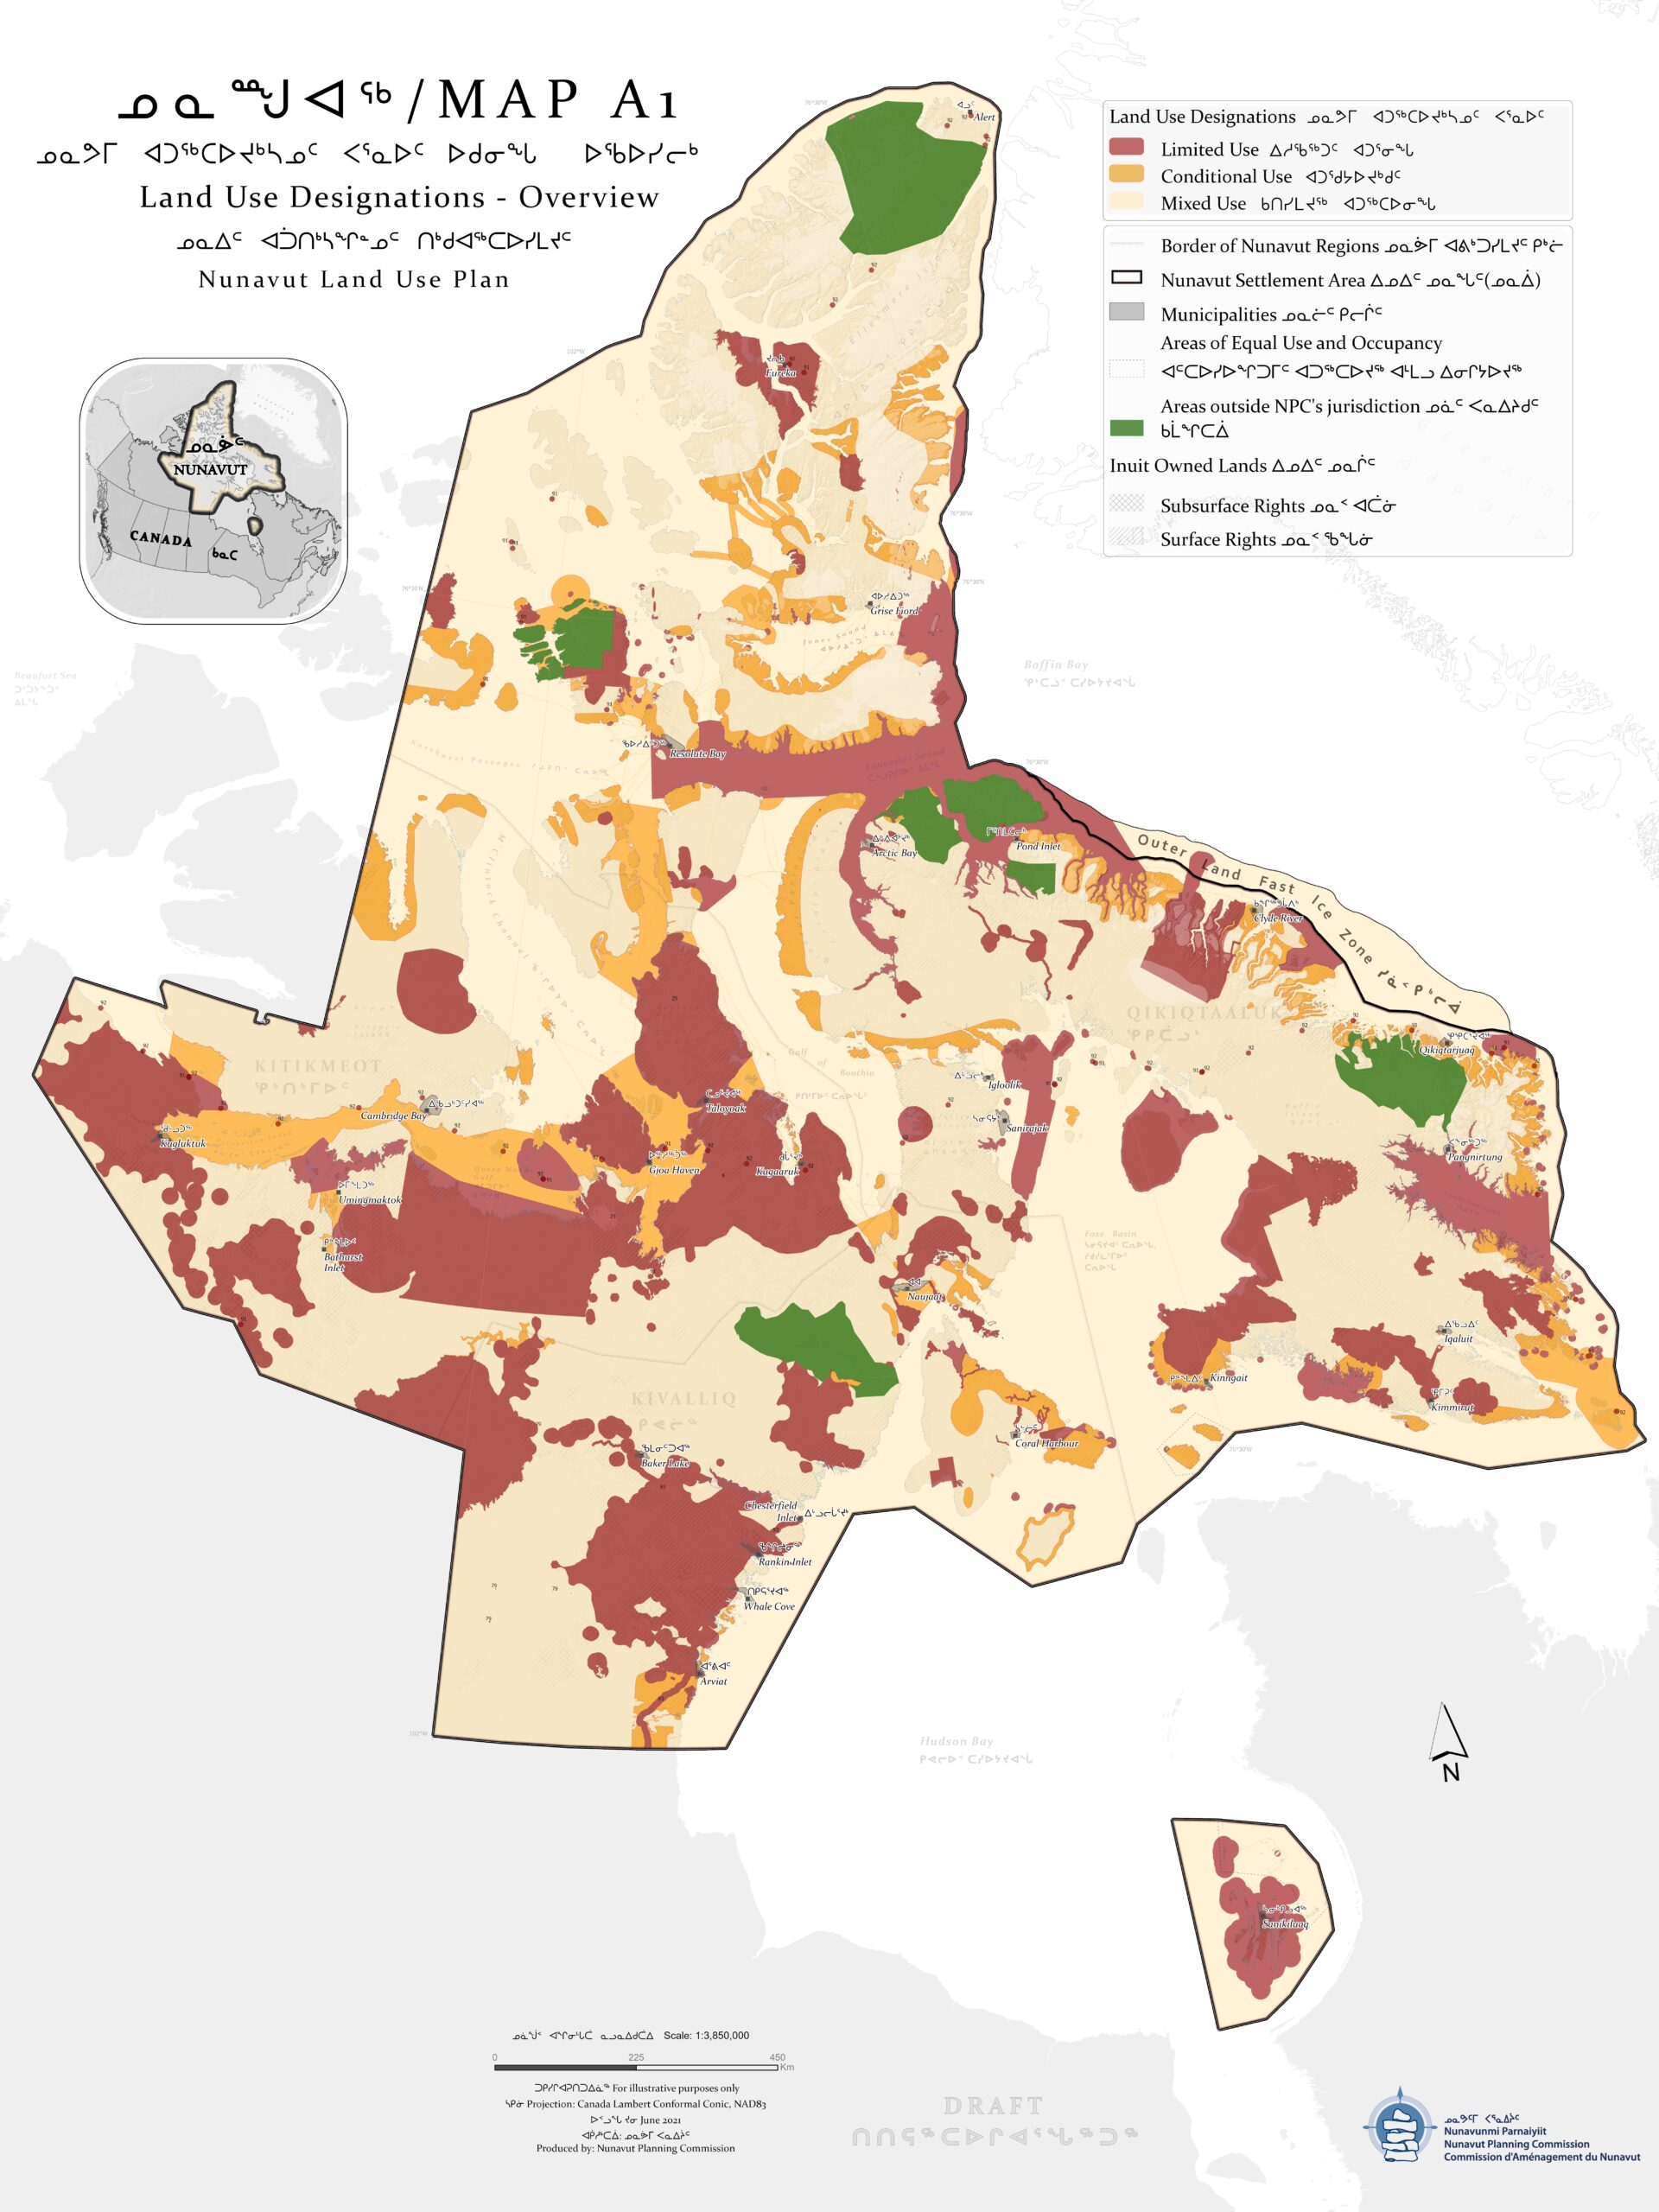 Map of Nunavut showing land designations of limited use, mixed use and conditional use; Nunavut land use plan